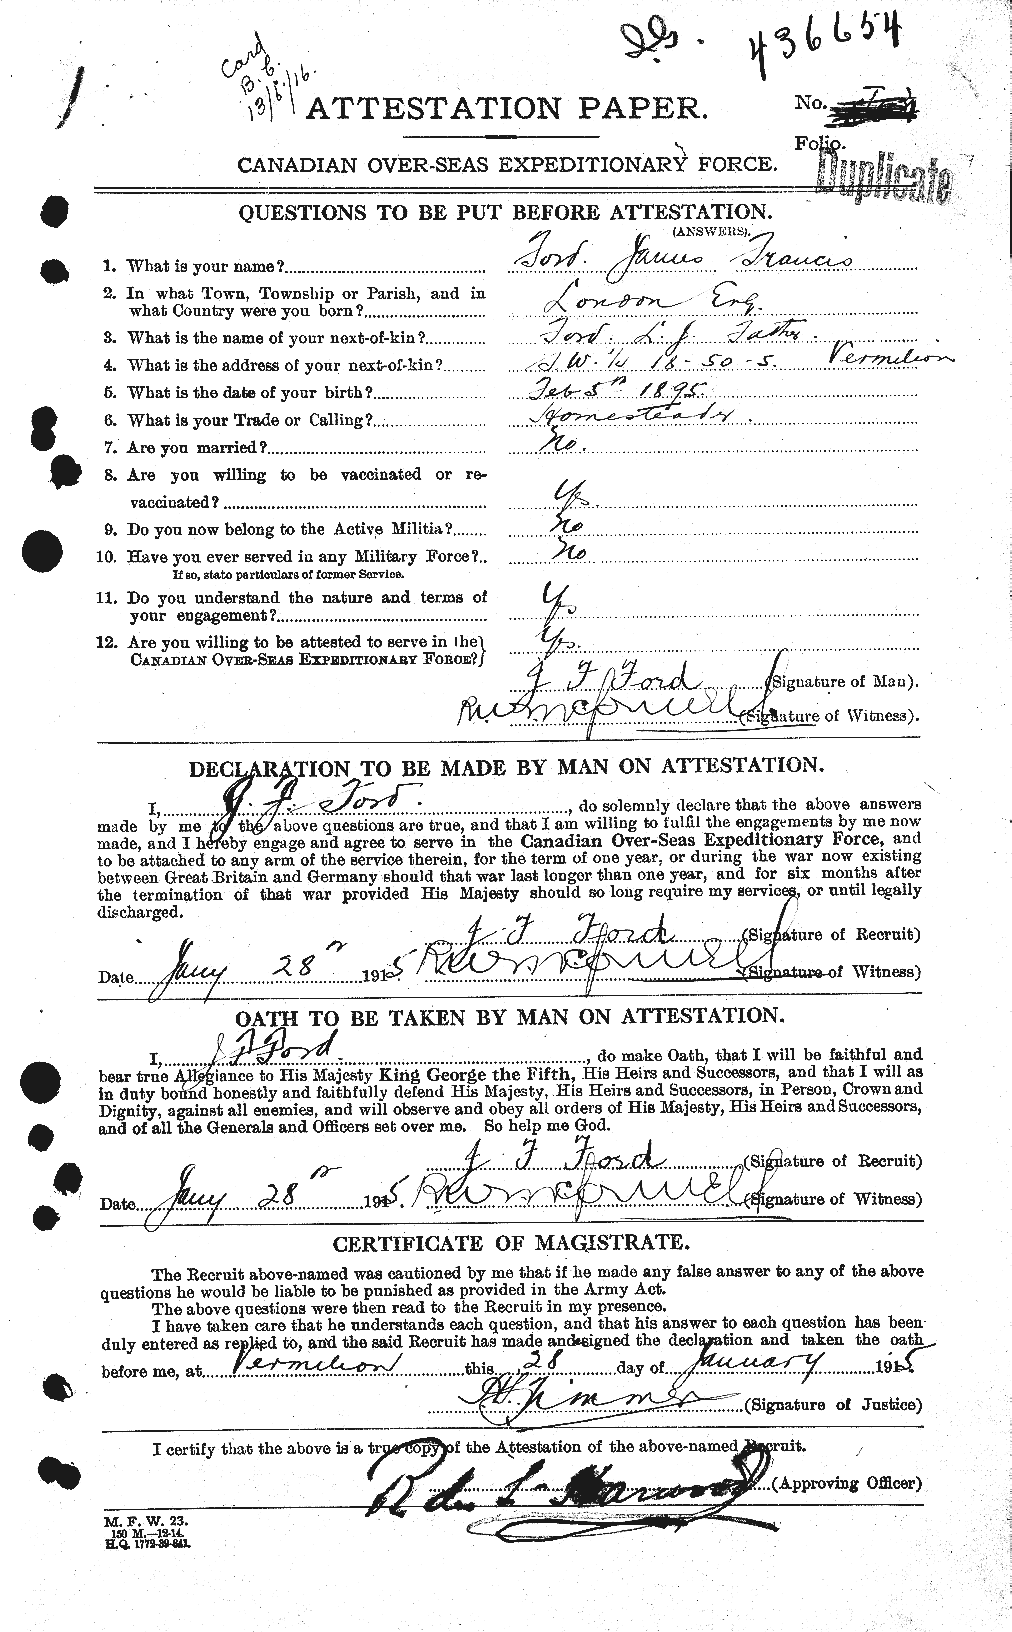 Personnel Records of the First World War - CEF 330054a